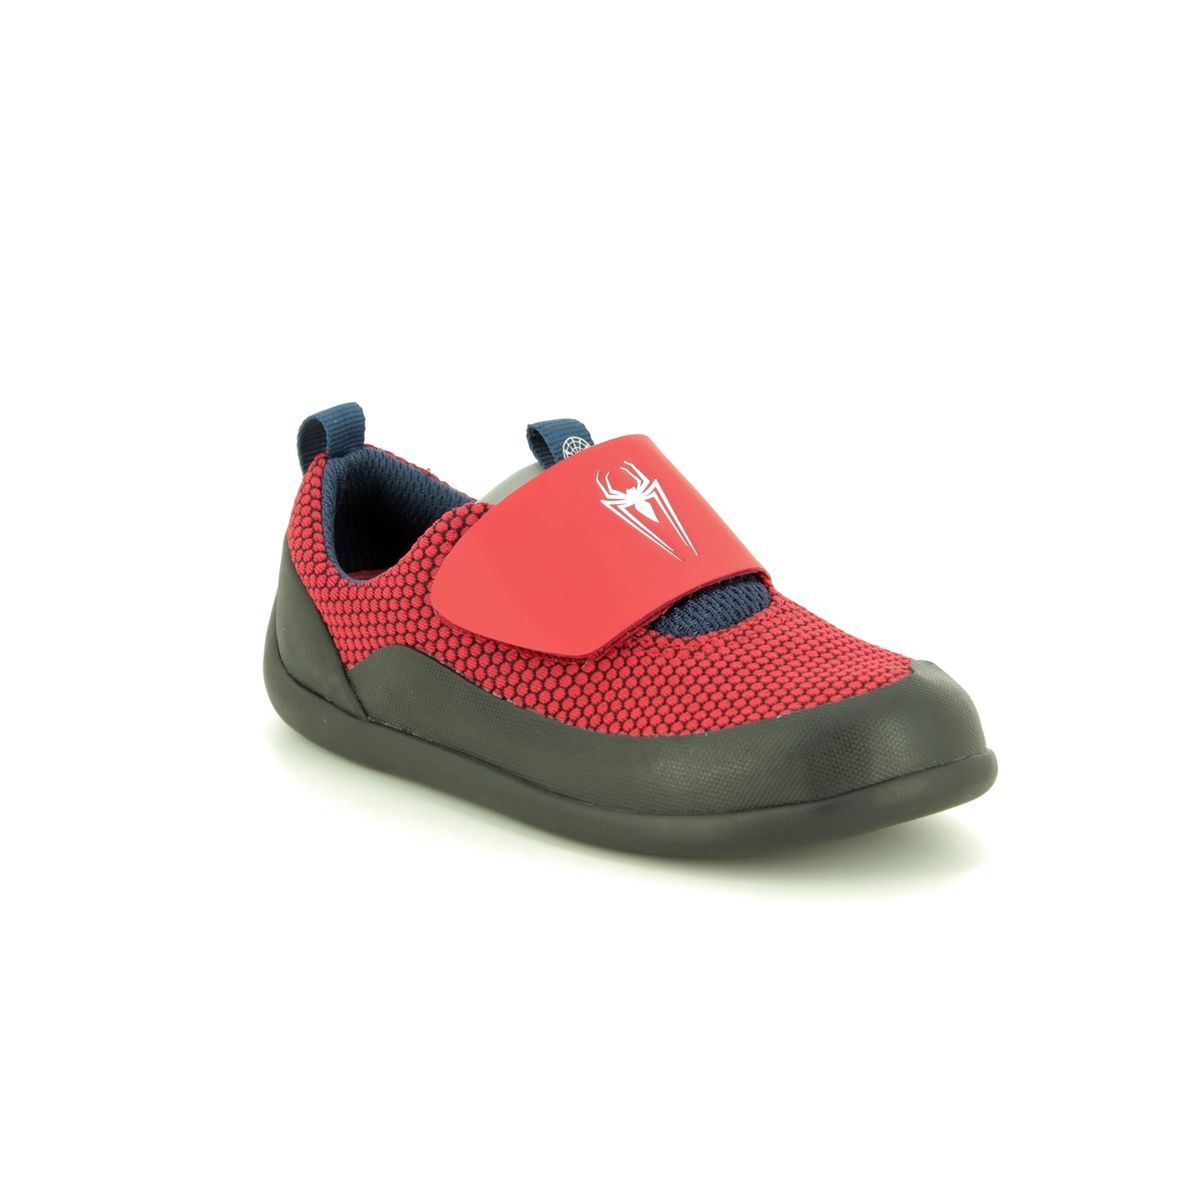 Clarks Spiderman Play Power T Red Kids Toddler Boys Trainers 4244-56F in a Plain Man-made in Size 5